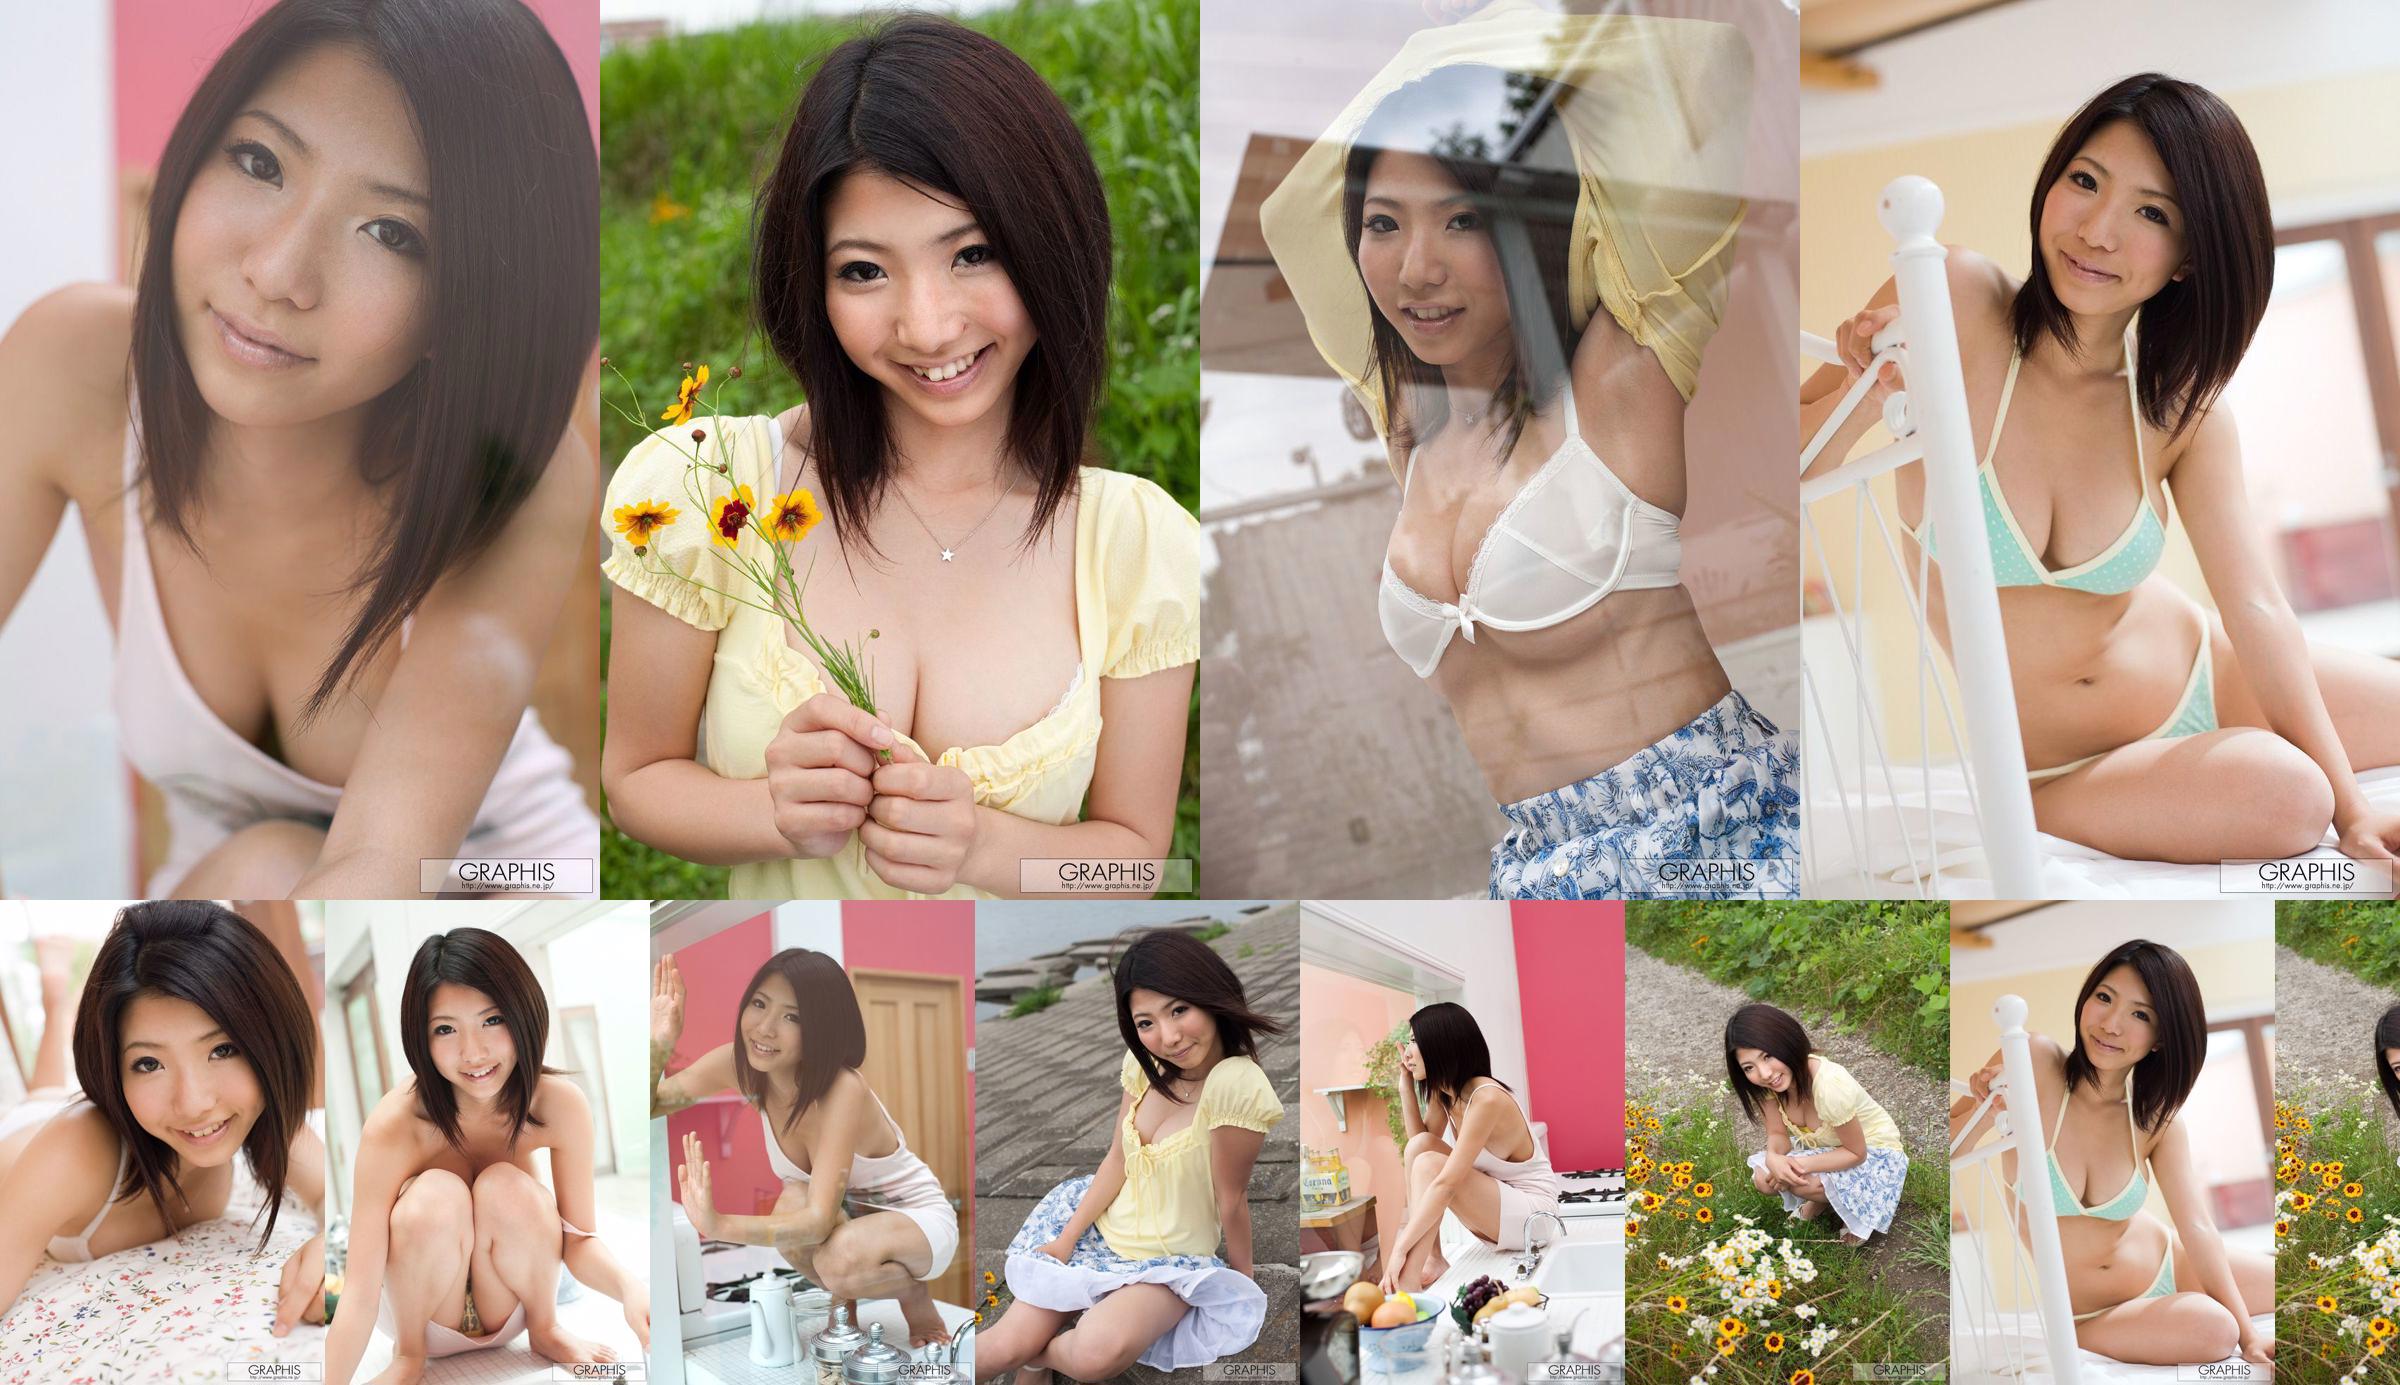 An Ann 《Simple and Innocent》 [Graphis] Gals No.b7a840 Seite 2